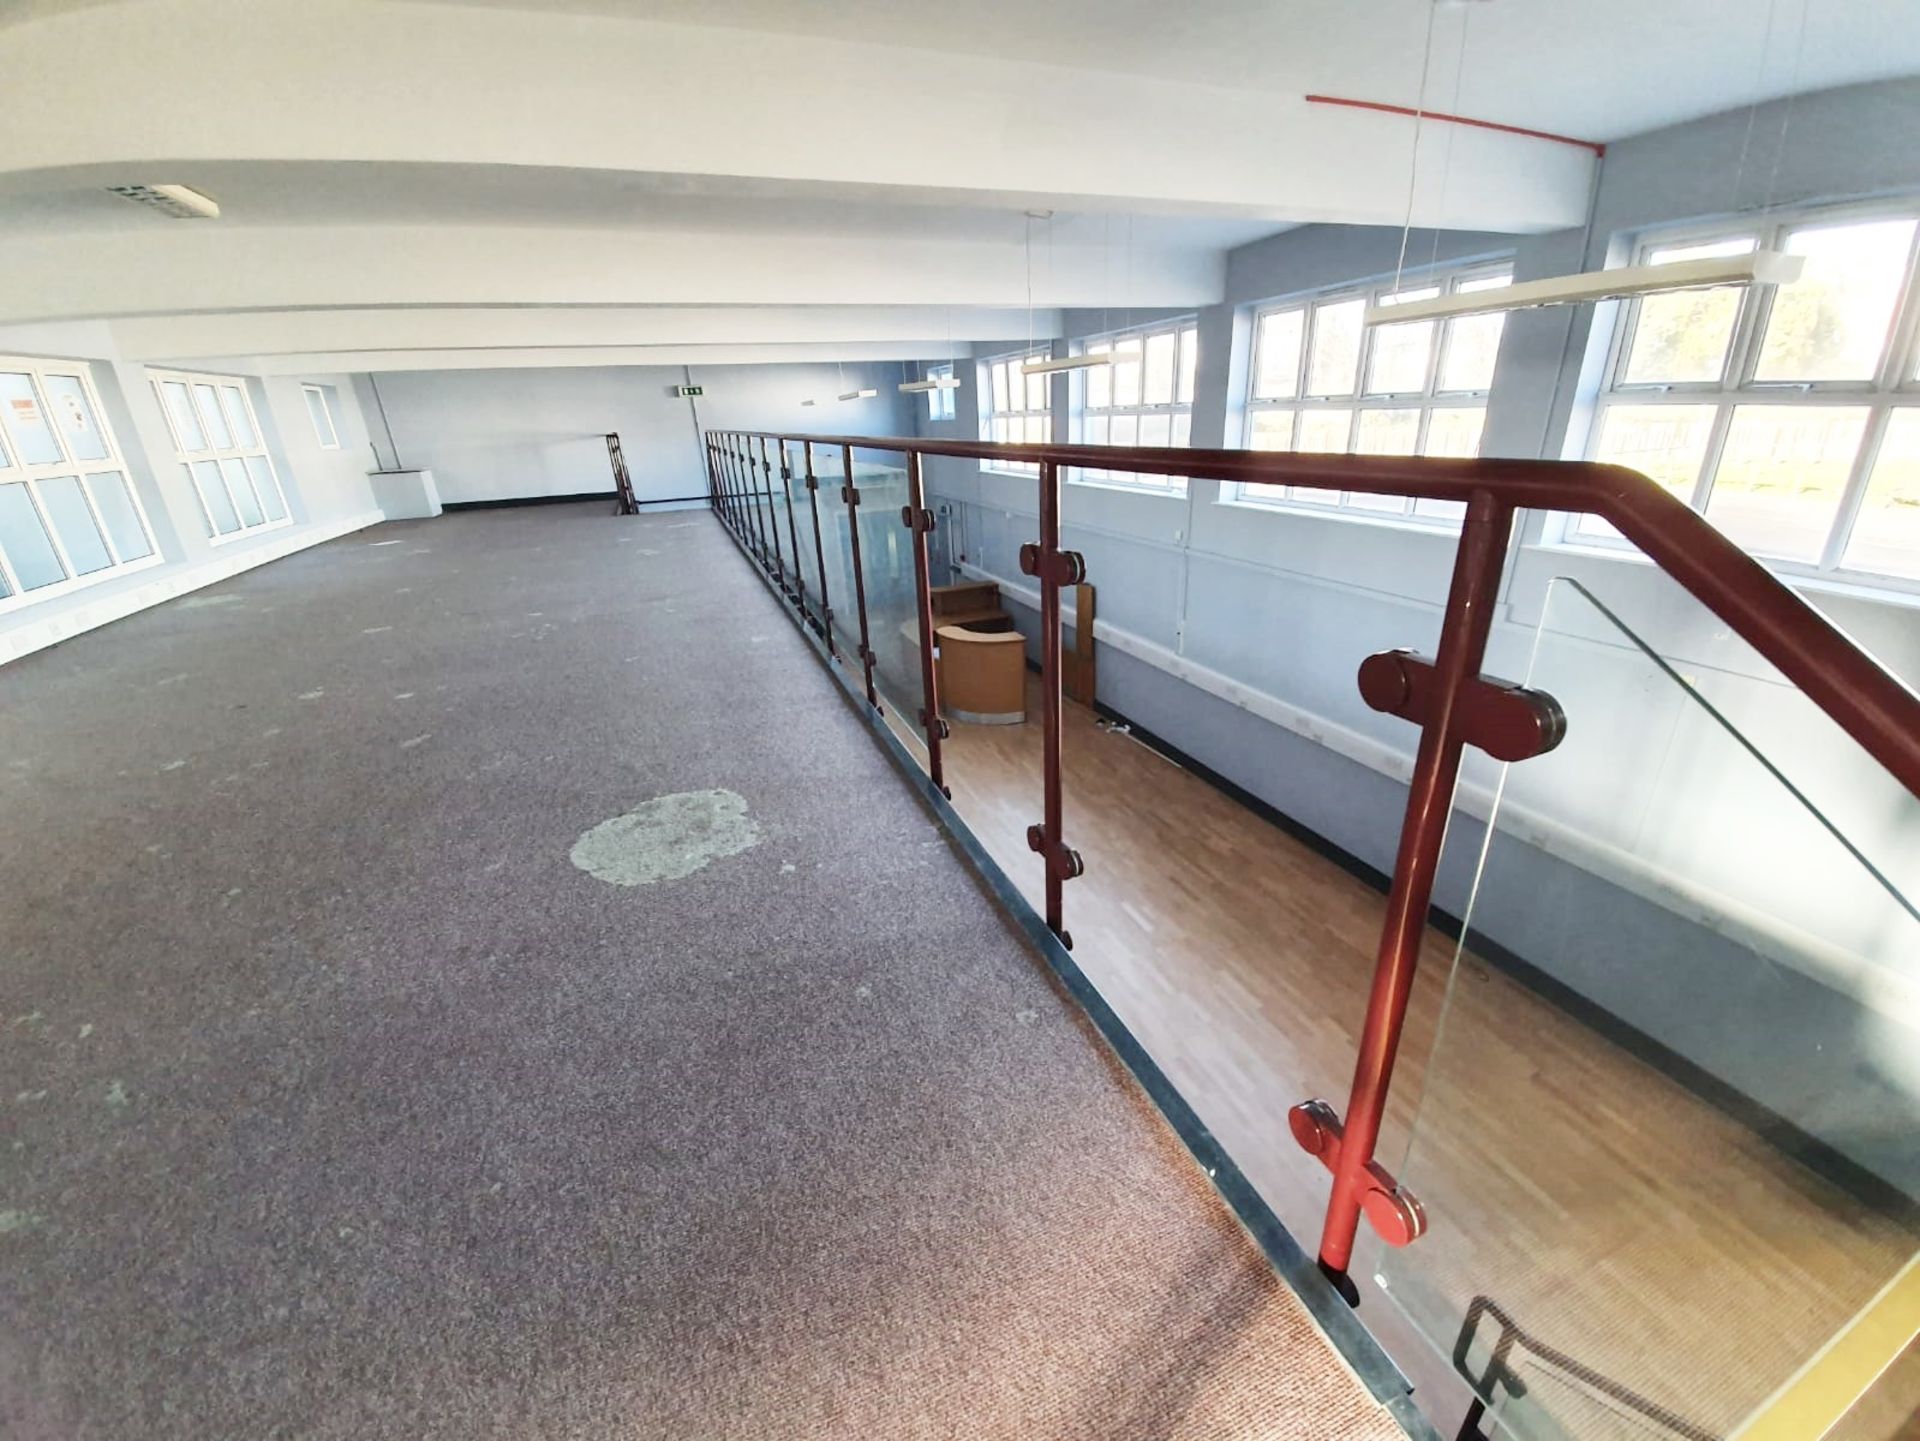 1 x Mezzanine Floor With Two Sets of Floating Stairs and Glazed Safety Panels With Hand Rails - From - Image 17 of 18